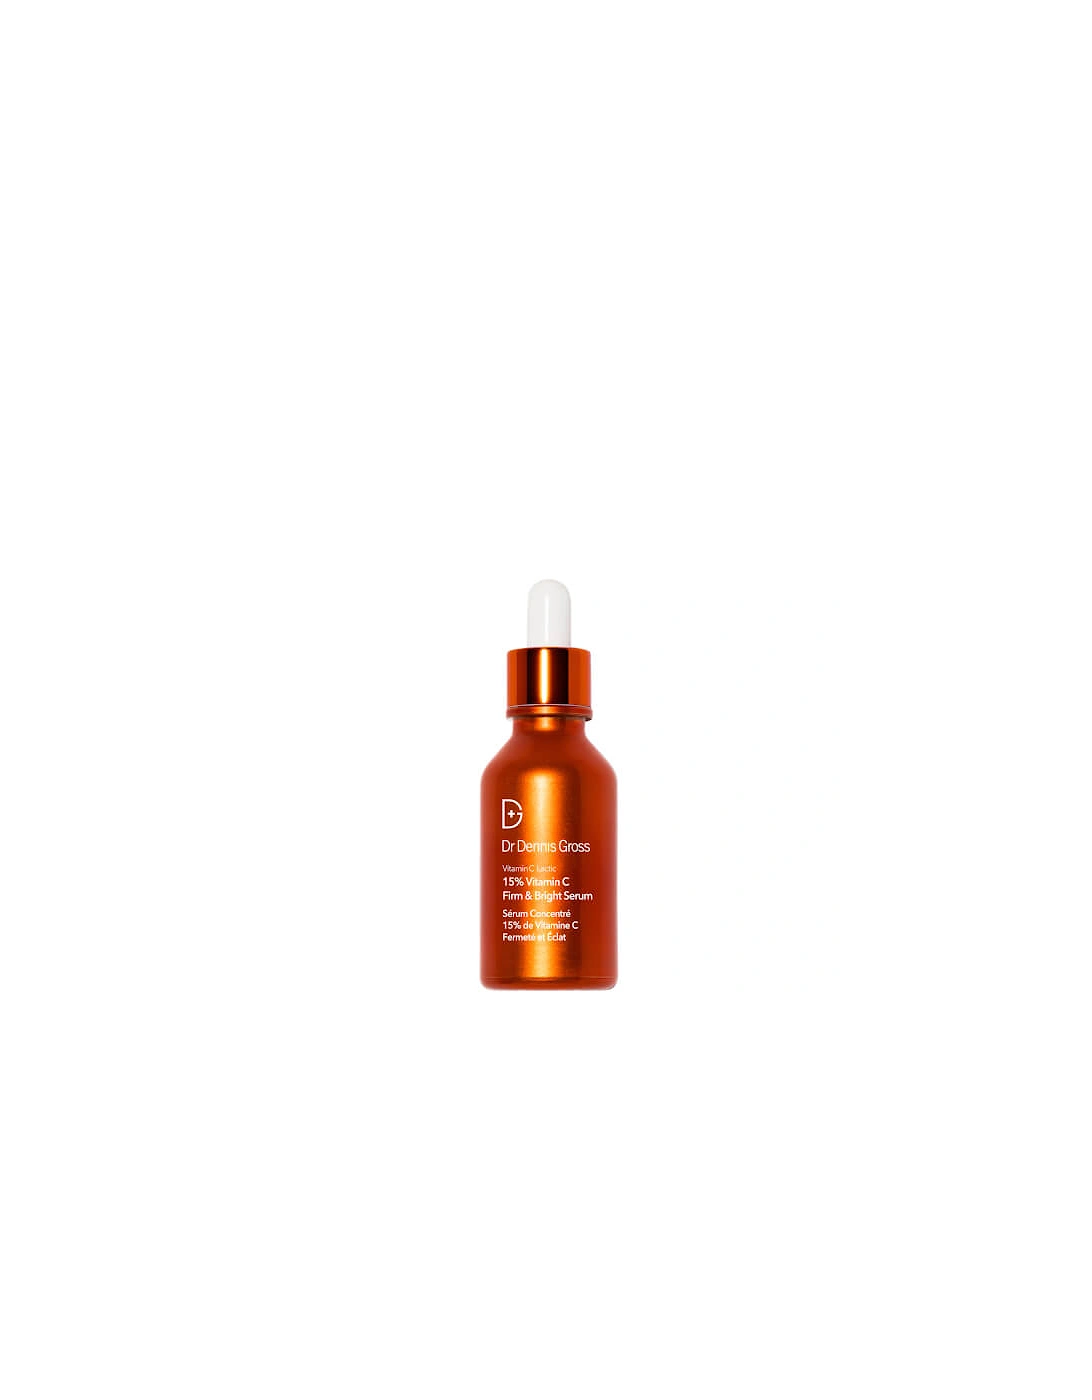 Vitamin C and Lactic 15% Vitamin C Firm and Bright Serum 30ml, 2 of 1